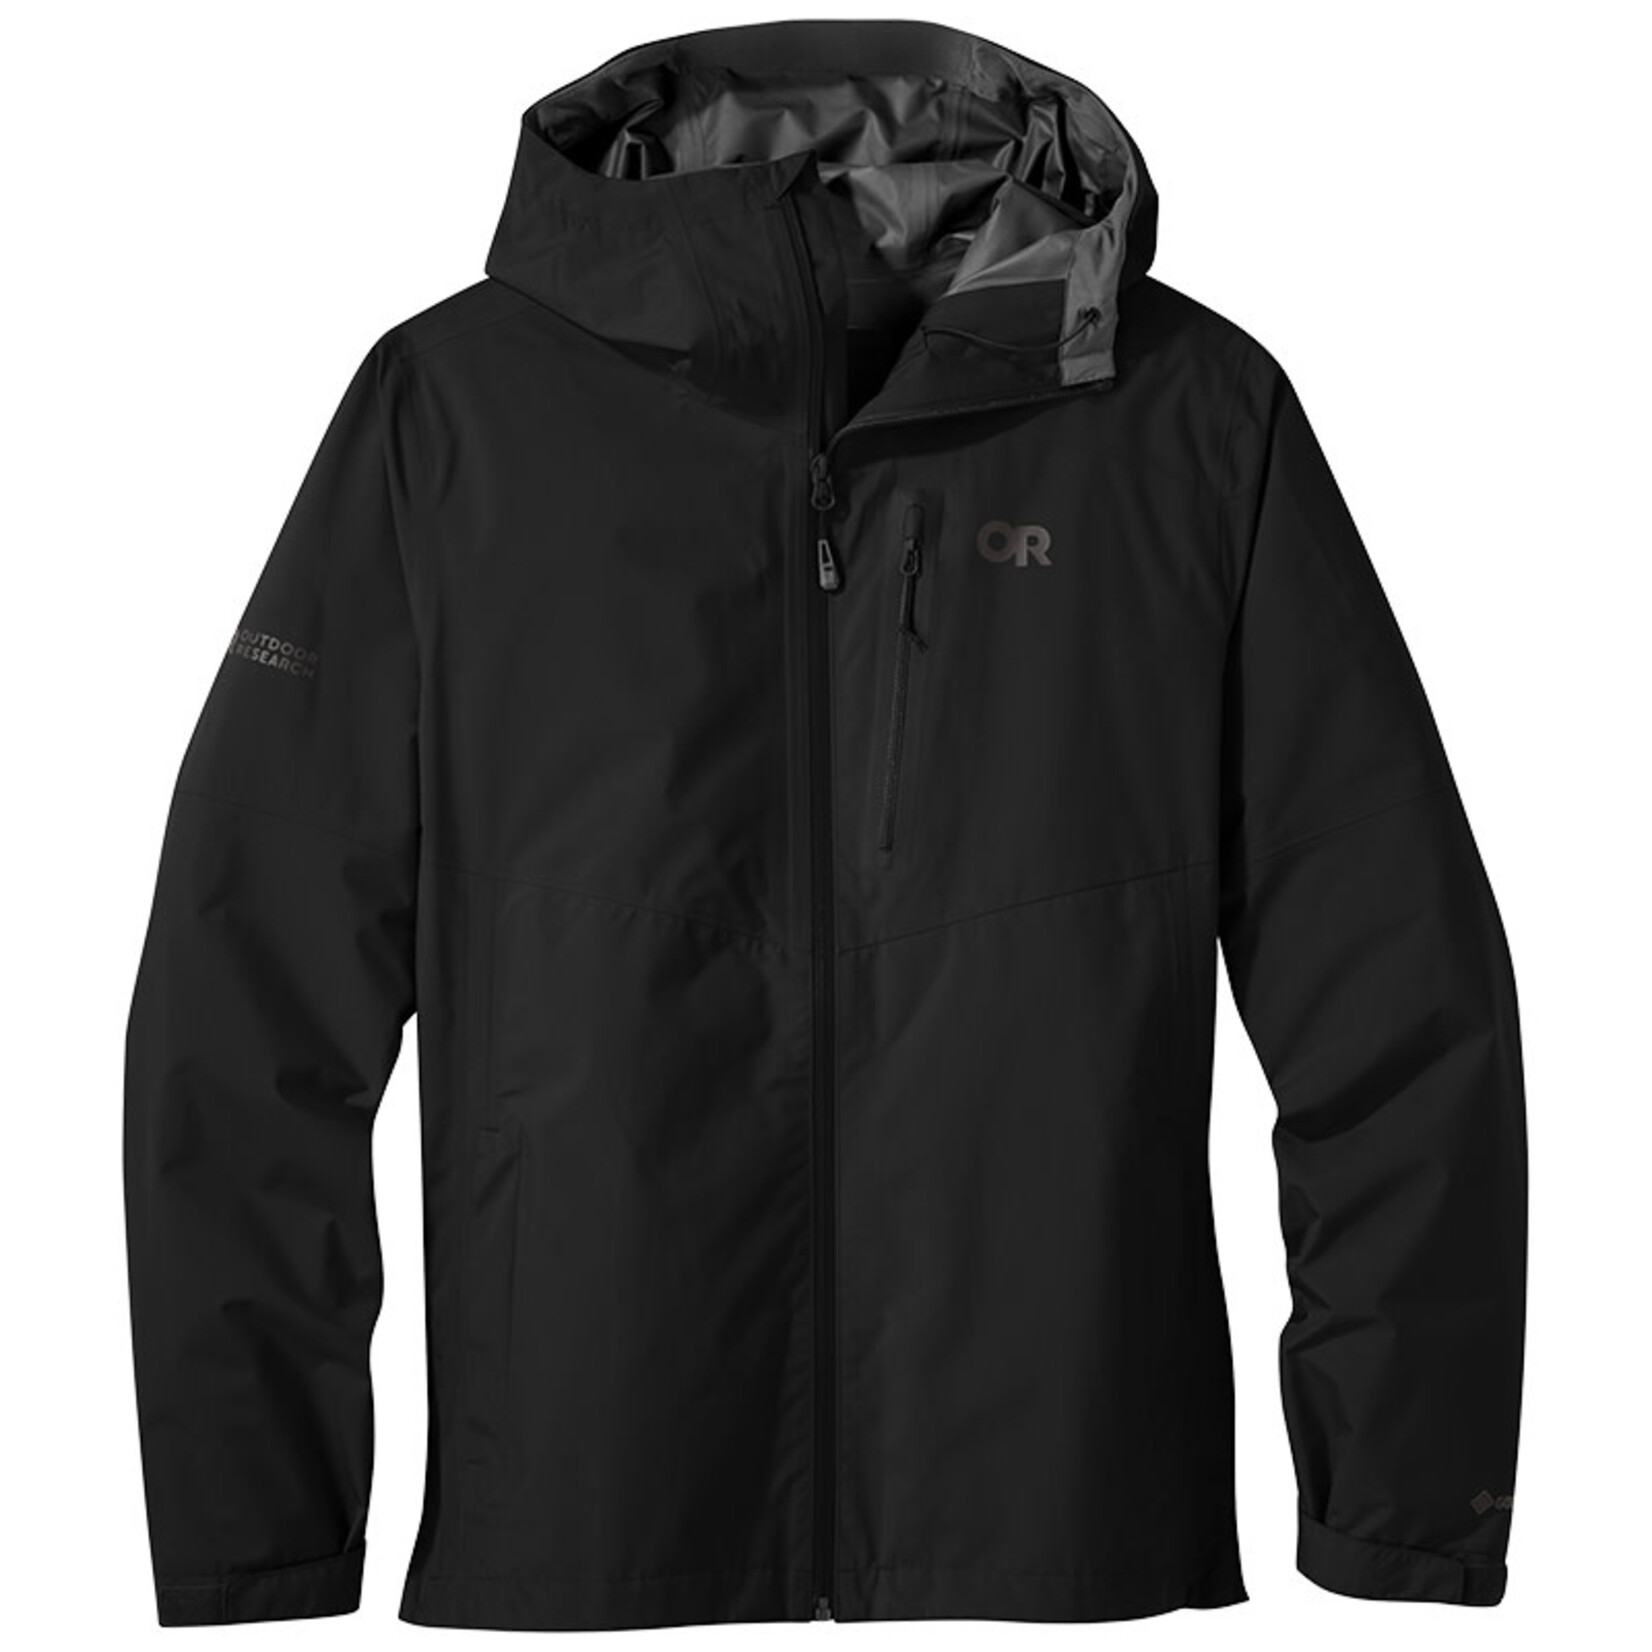 Outdoor Research Foray II Jacket